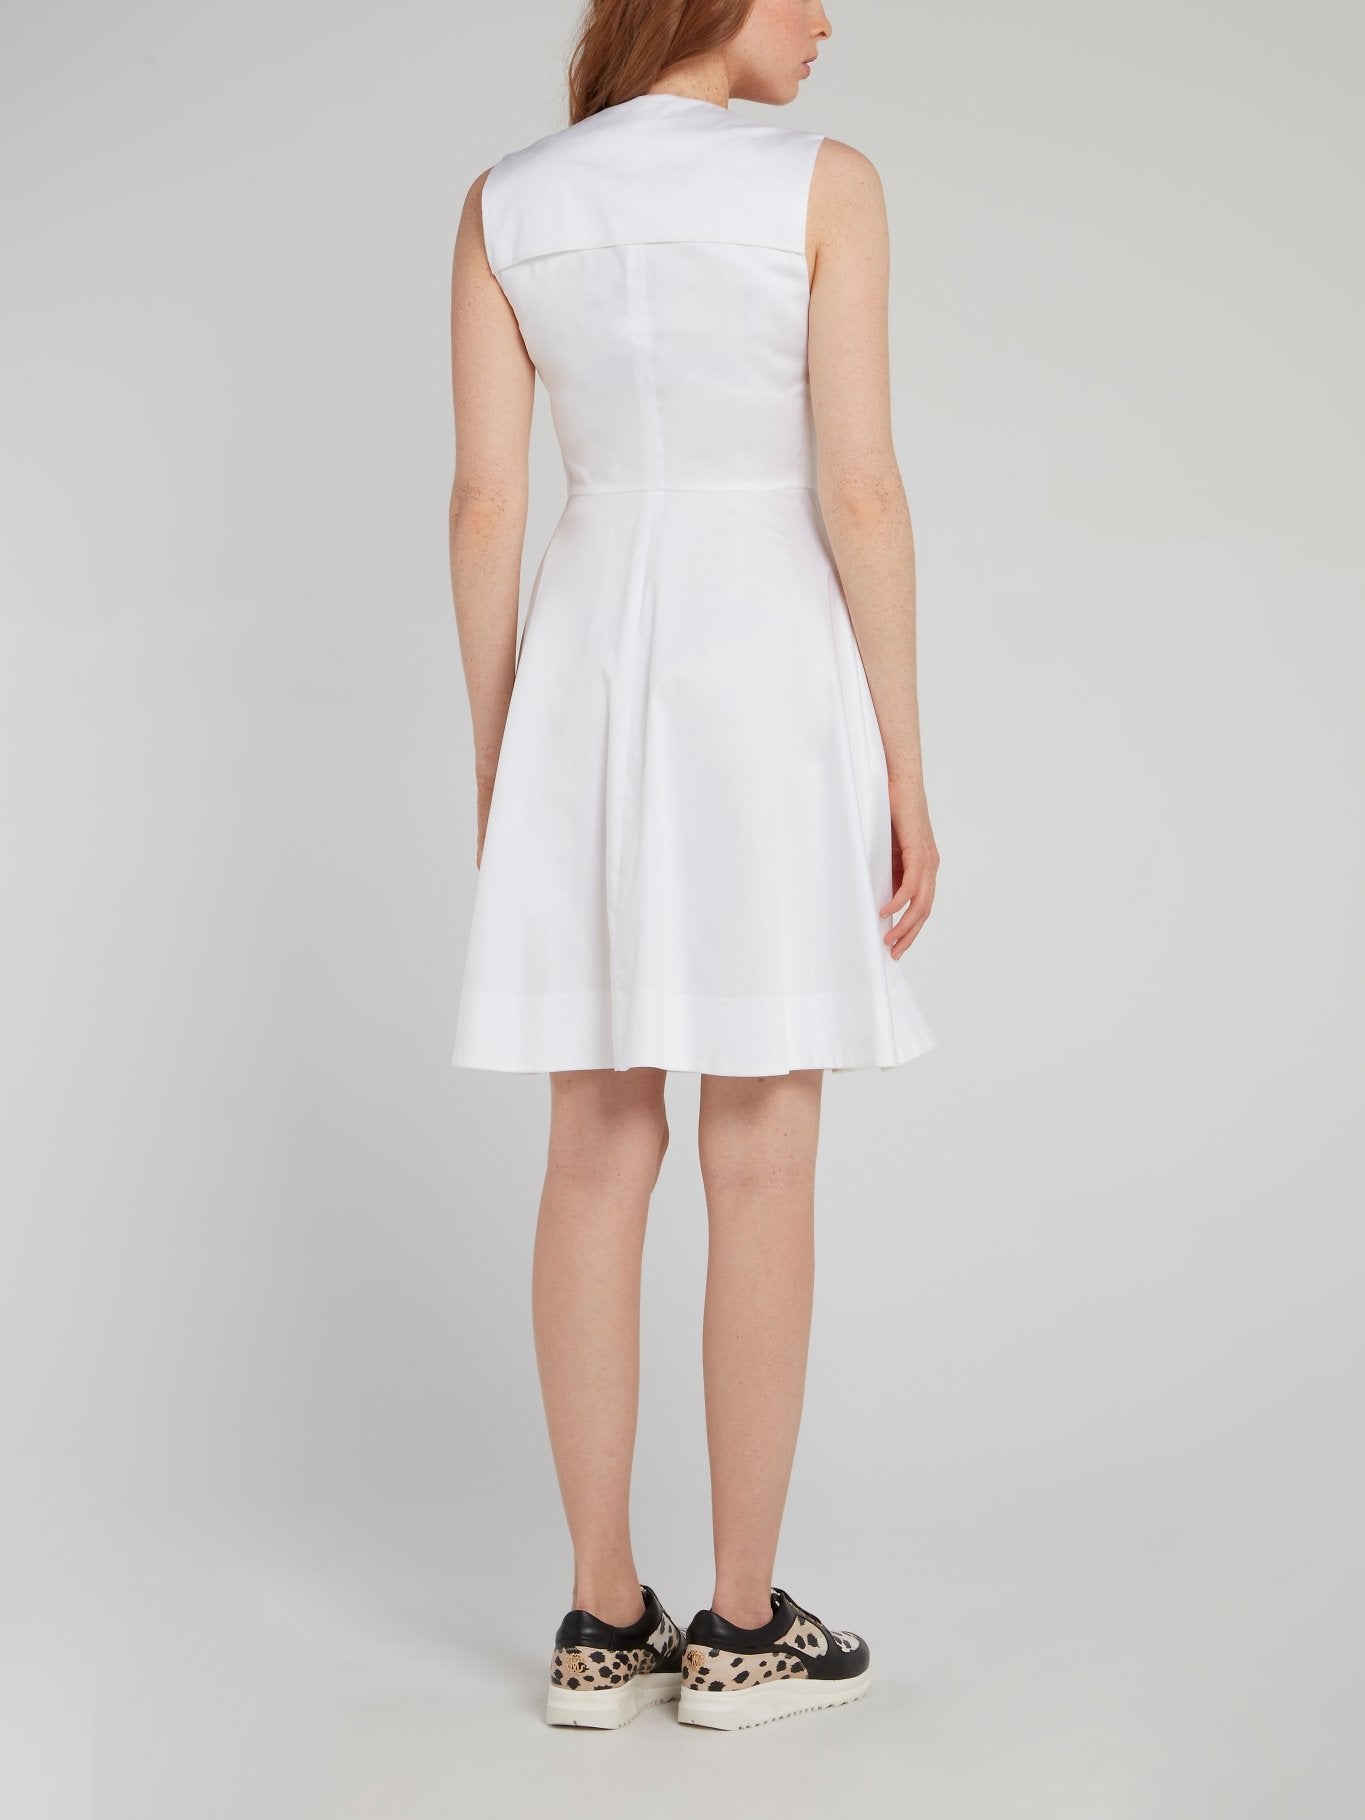 White Flared Button Up Dress